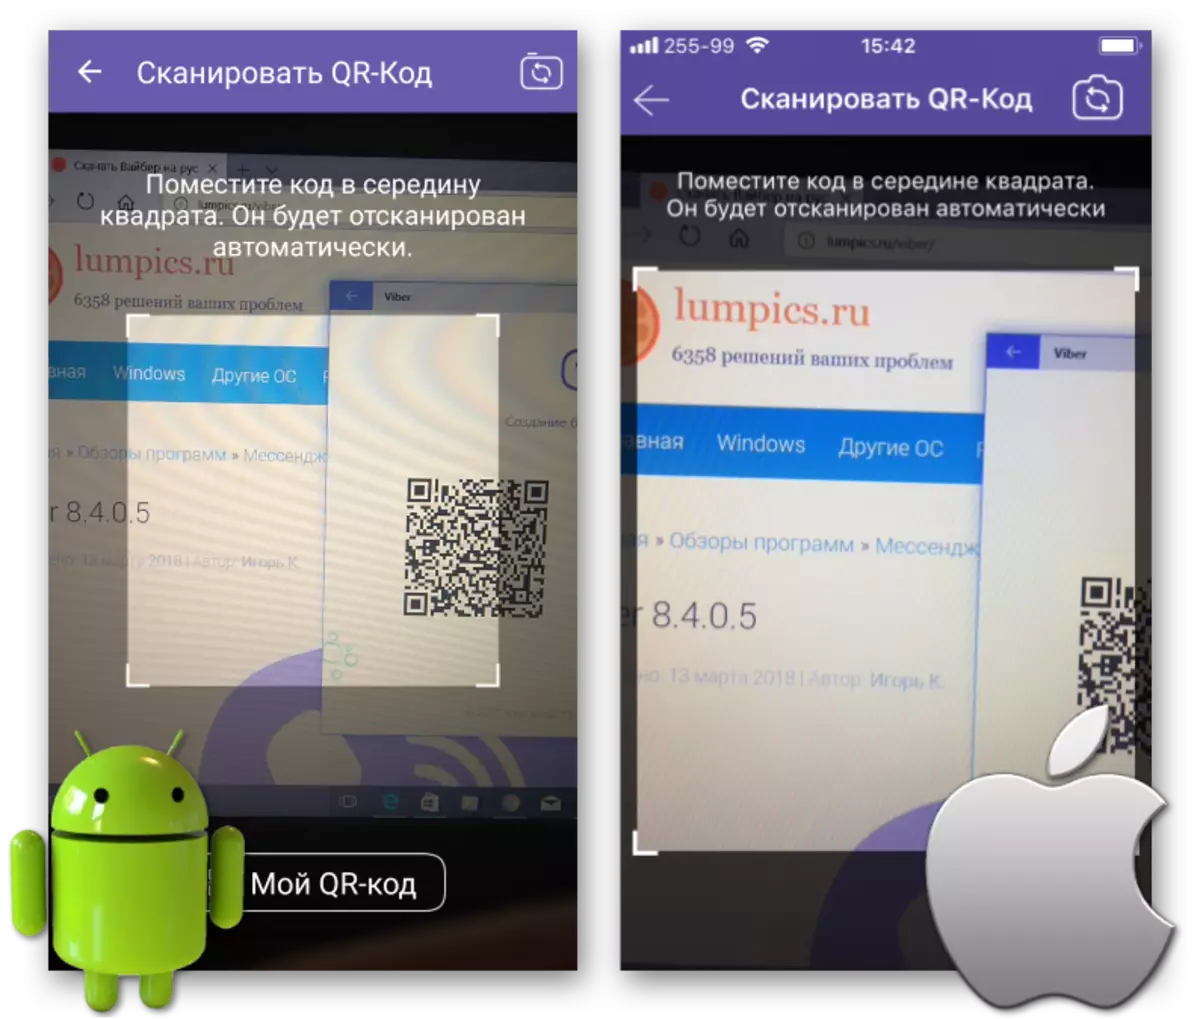 Viber for Windows QR-code scan using Android smartphone or iPhone